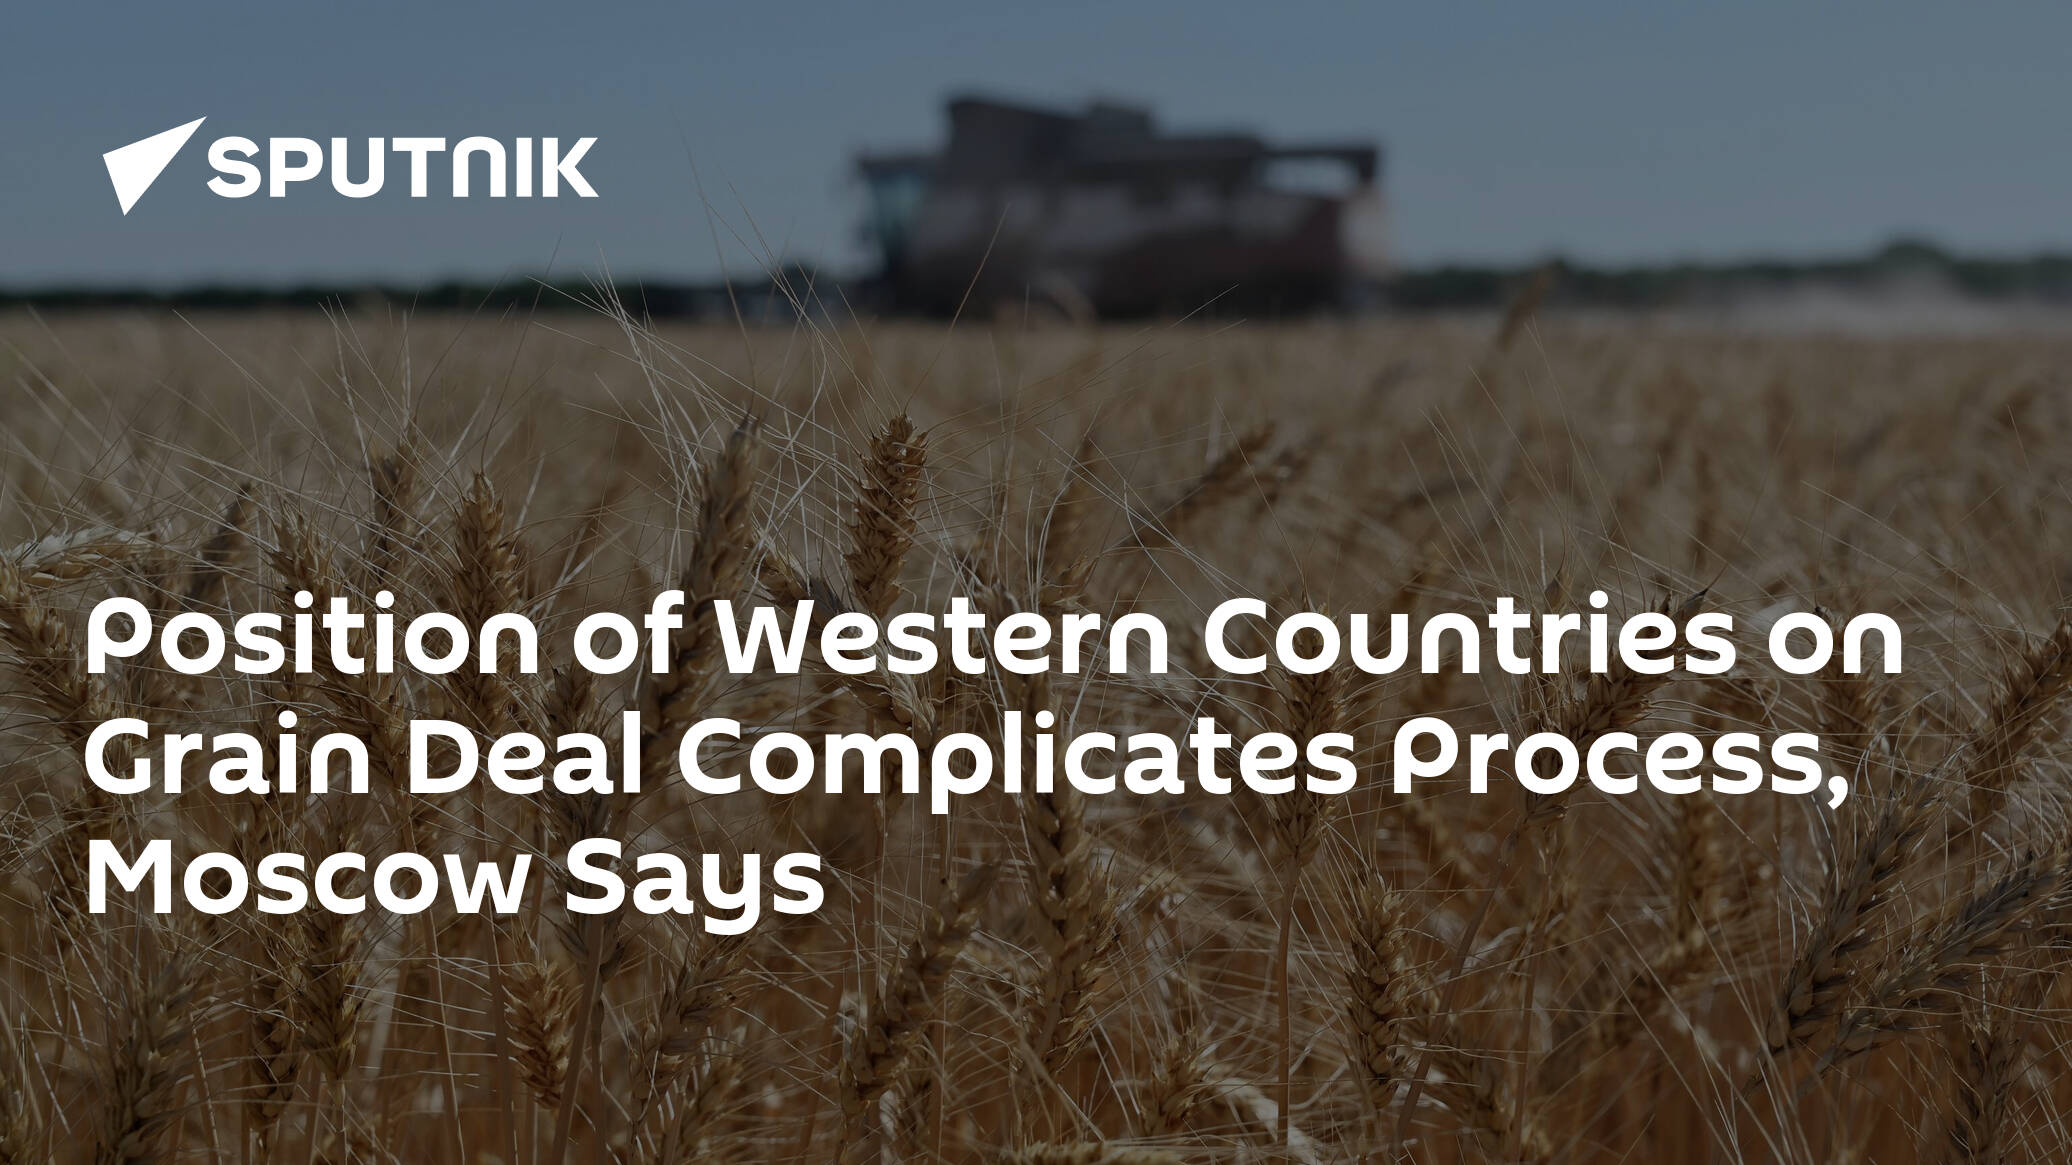 Kremlin on Grain Deal: Position of Western Countries Complicates Process